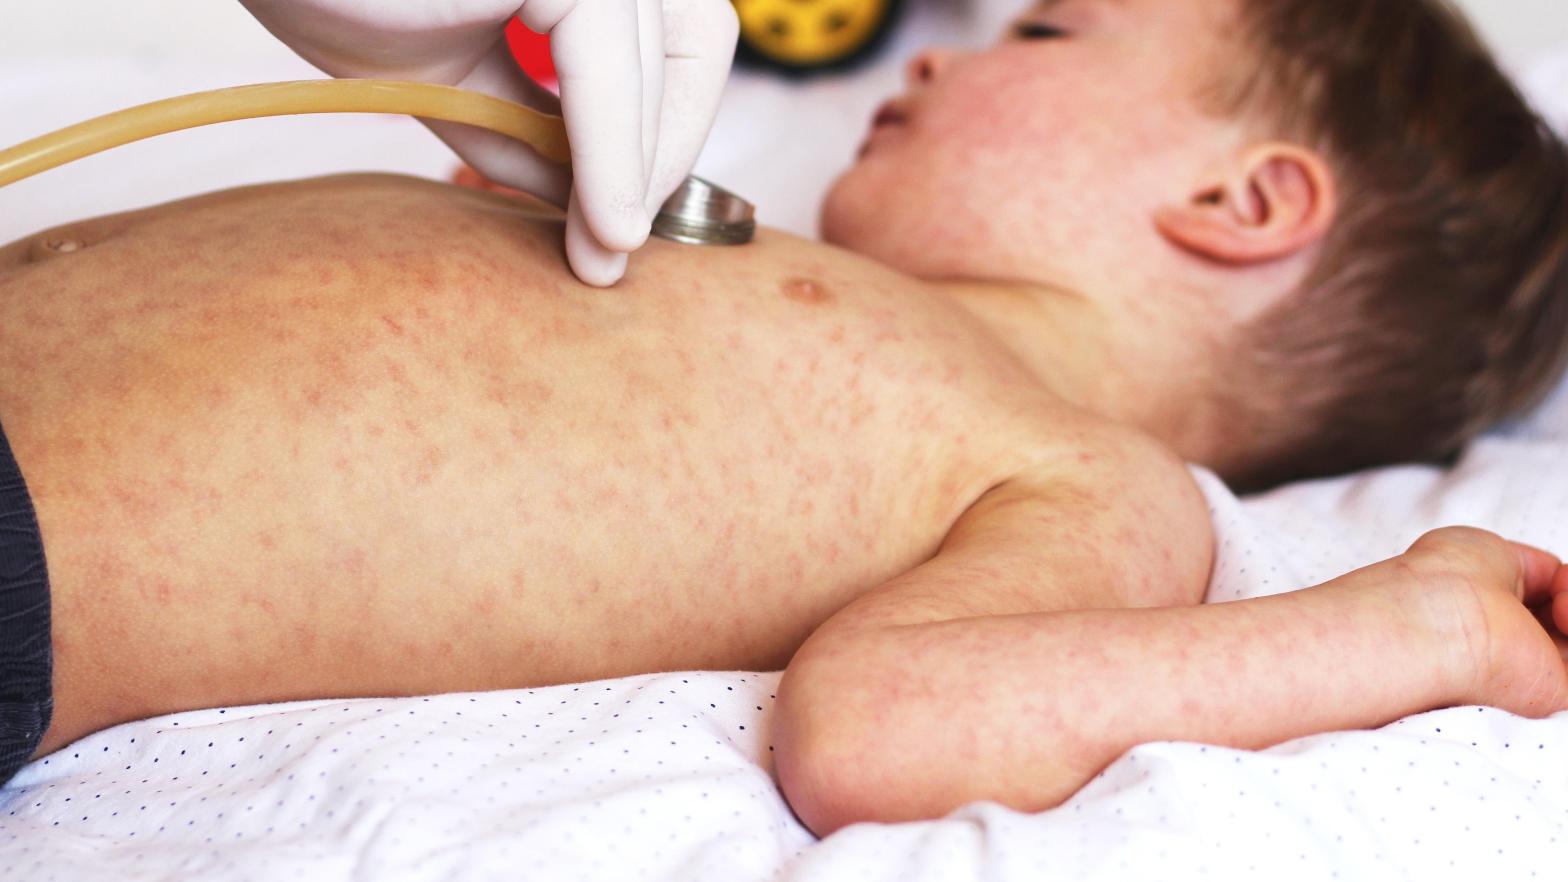 A child with a measles rash. (Photo: Shutterstock, Shutterstock)